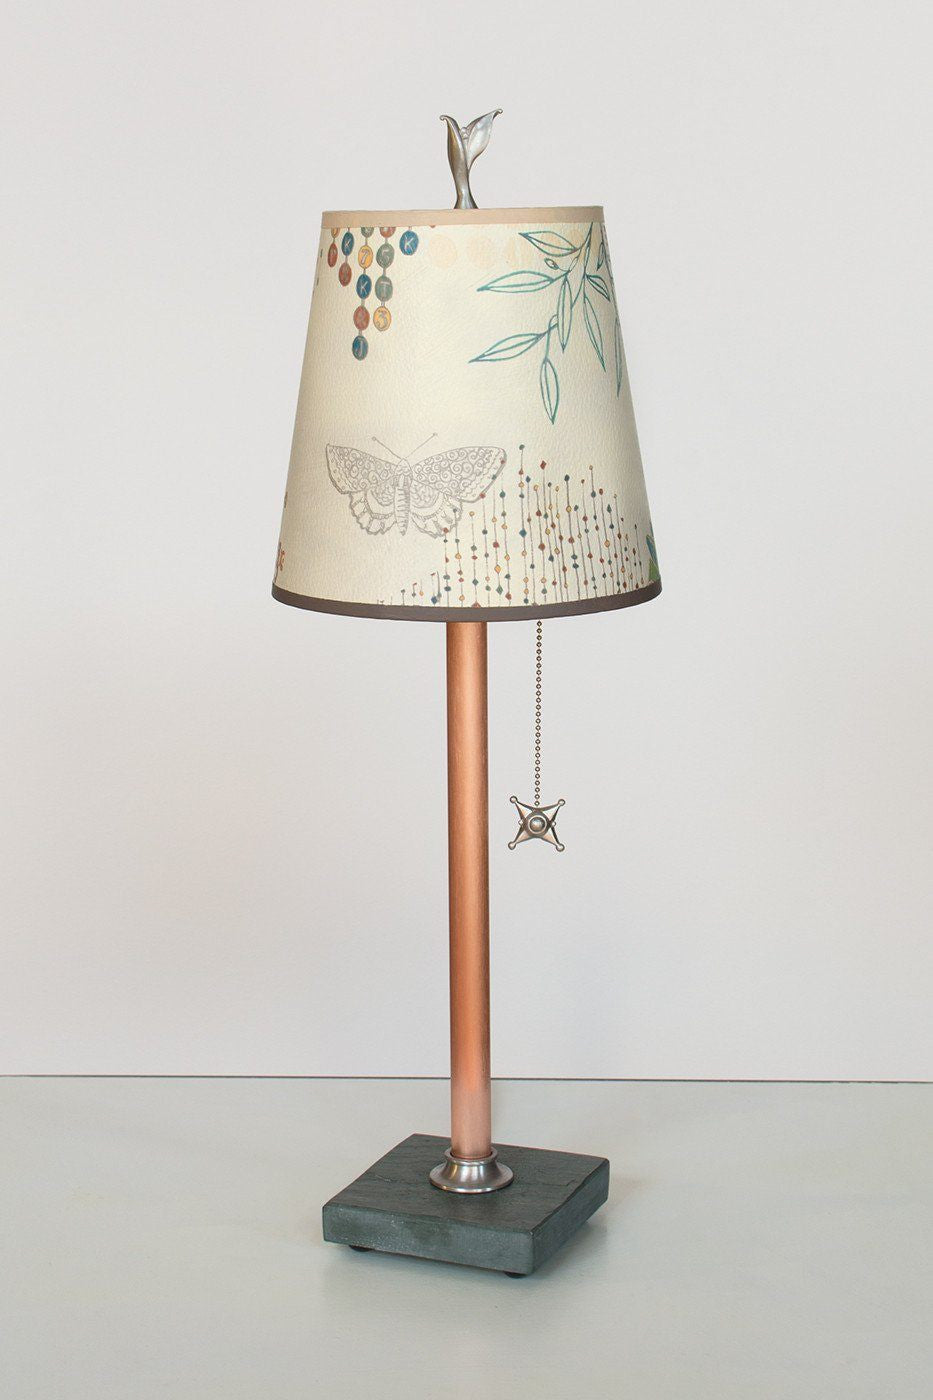 Janna Ugone &amp; Co Table Lamps Copper Table Lamp with Small Drum Shade in Ecru Journey